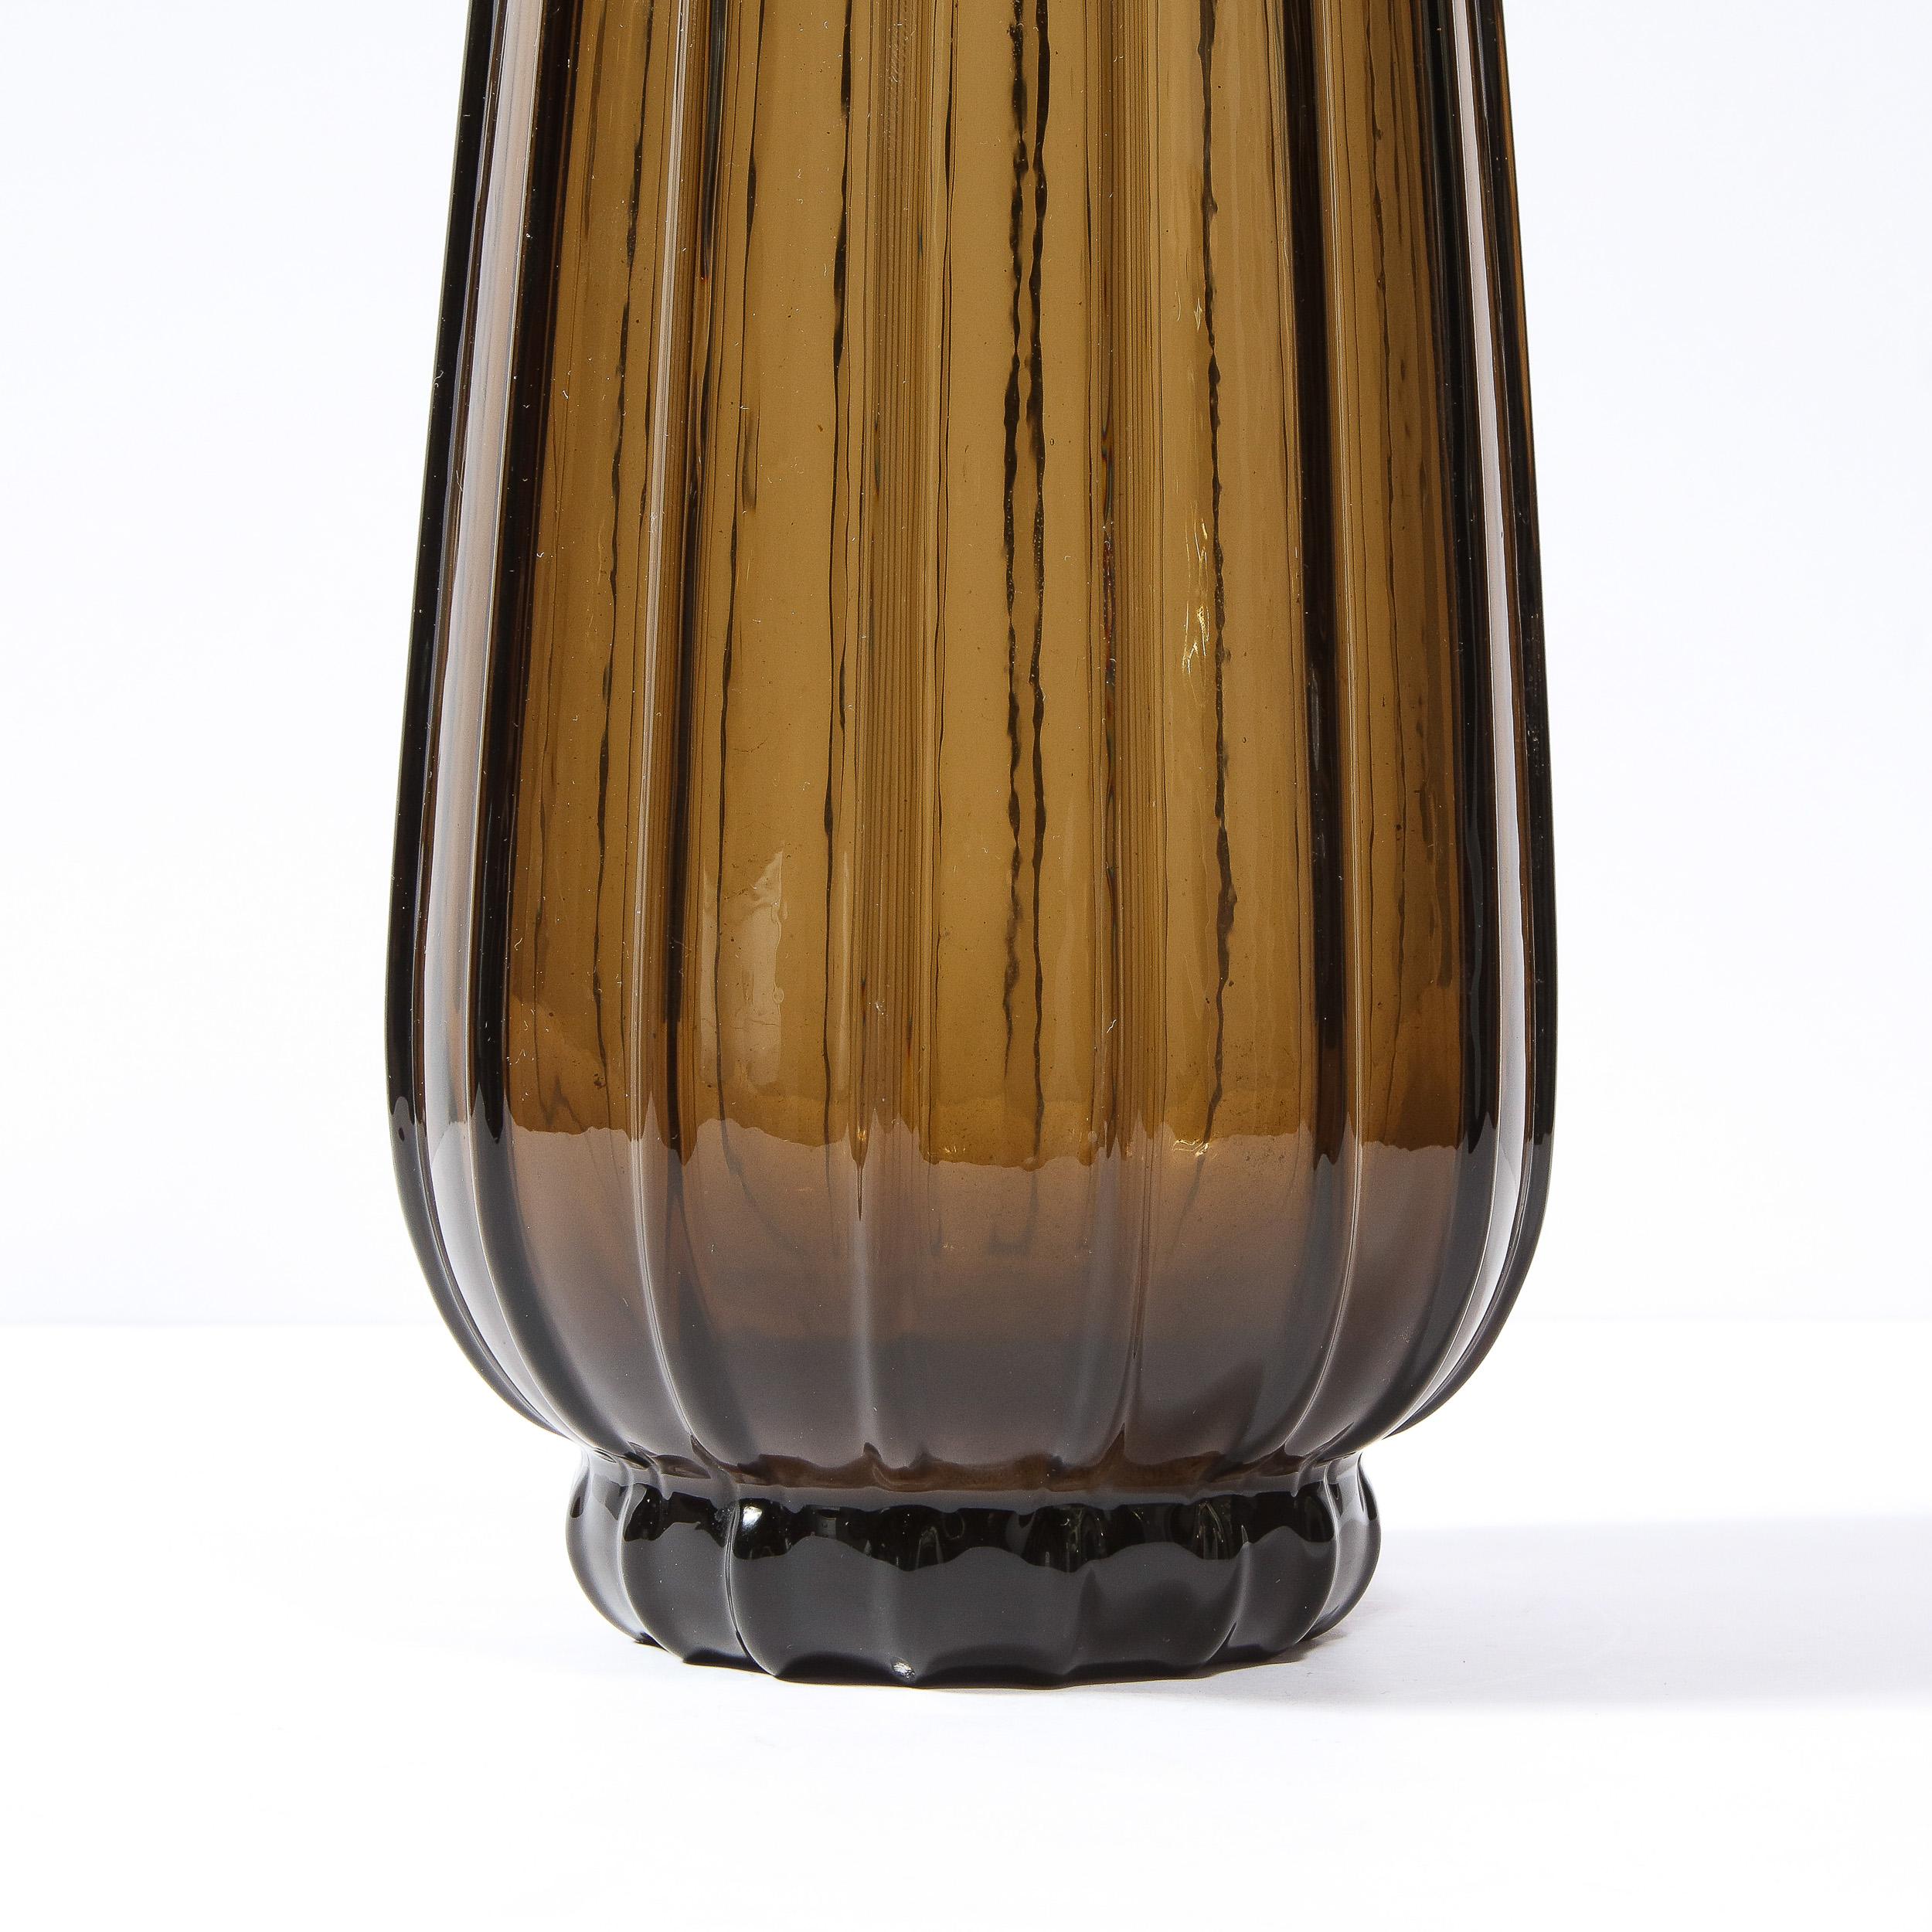 1930s Art Deco Topaz Colored Hand Blown Tall Vase, Signed by Daum Nancy France For Sale 2